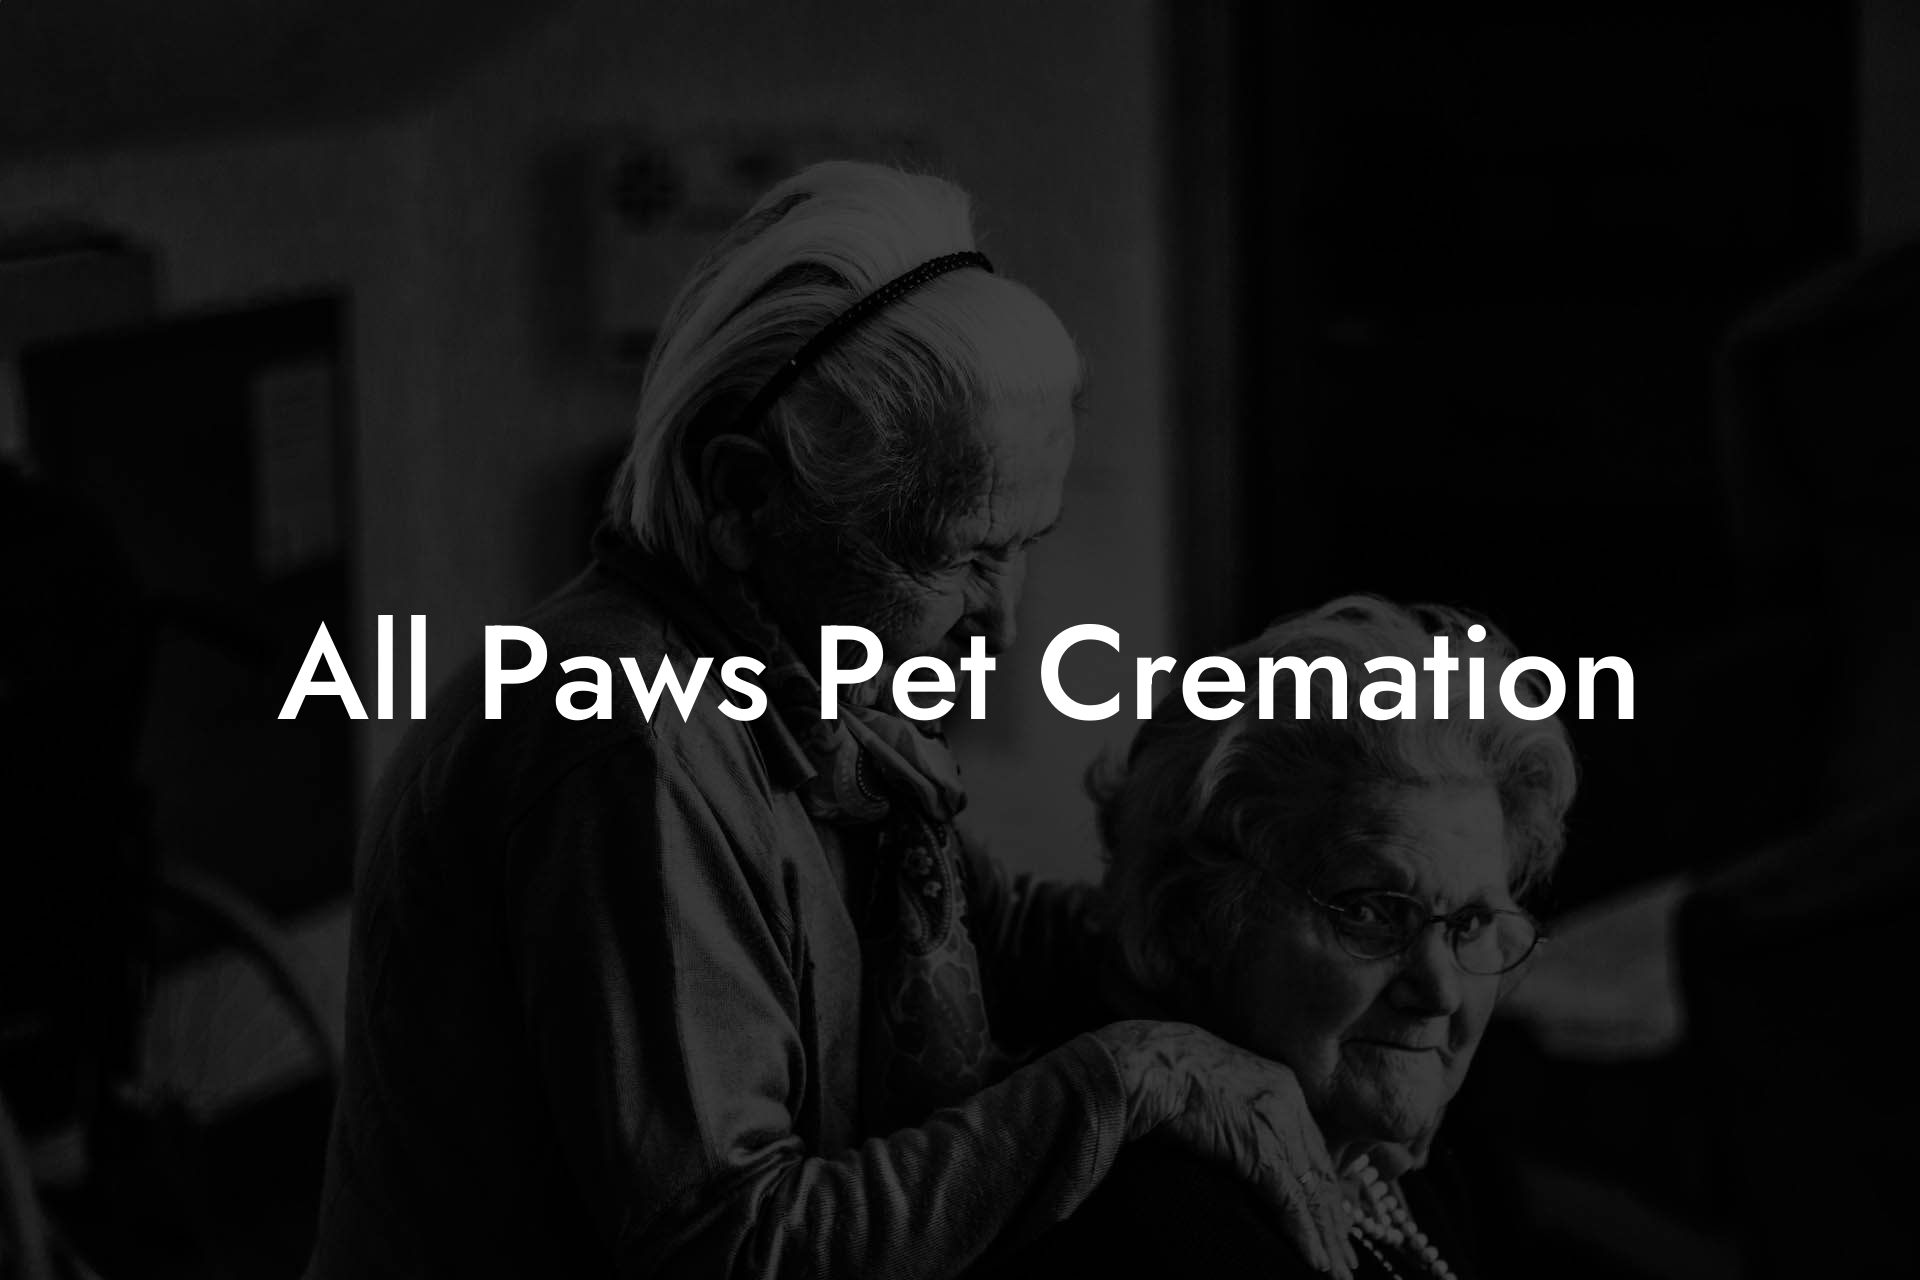 All Paws Pet Cremation